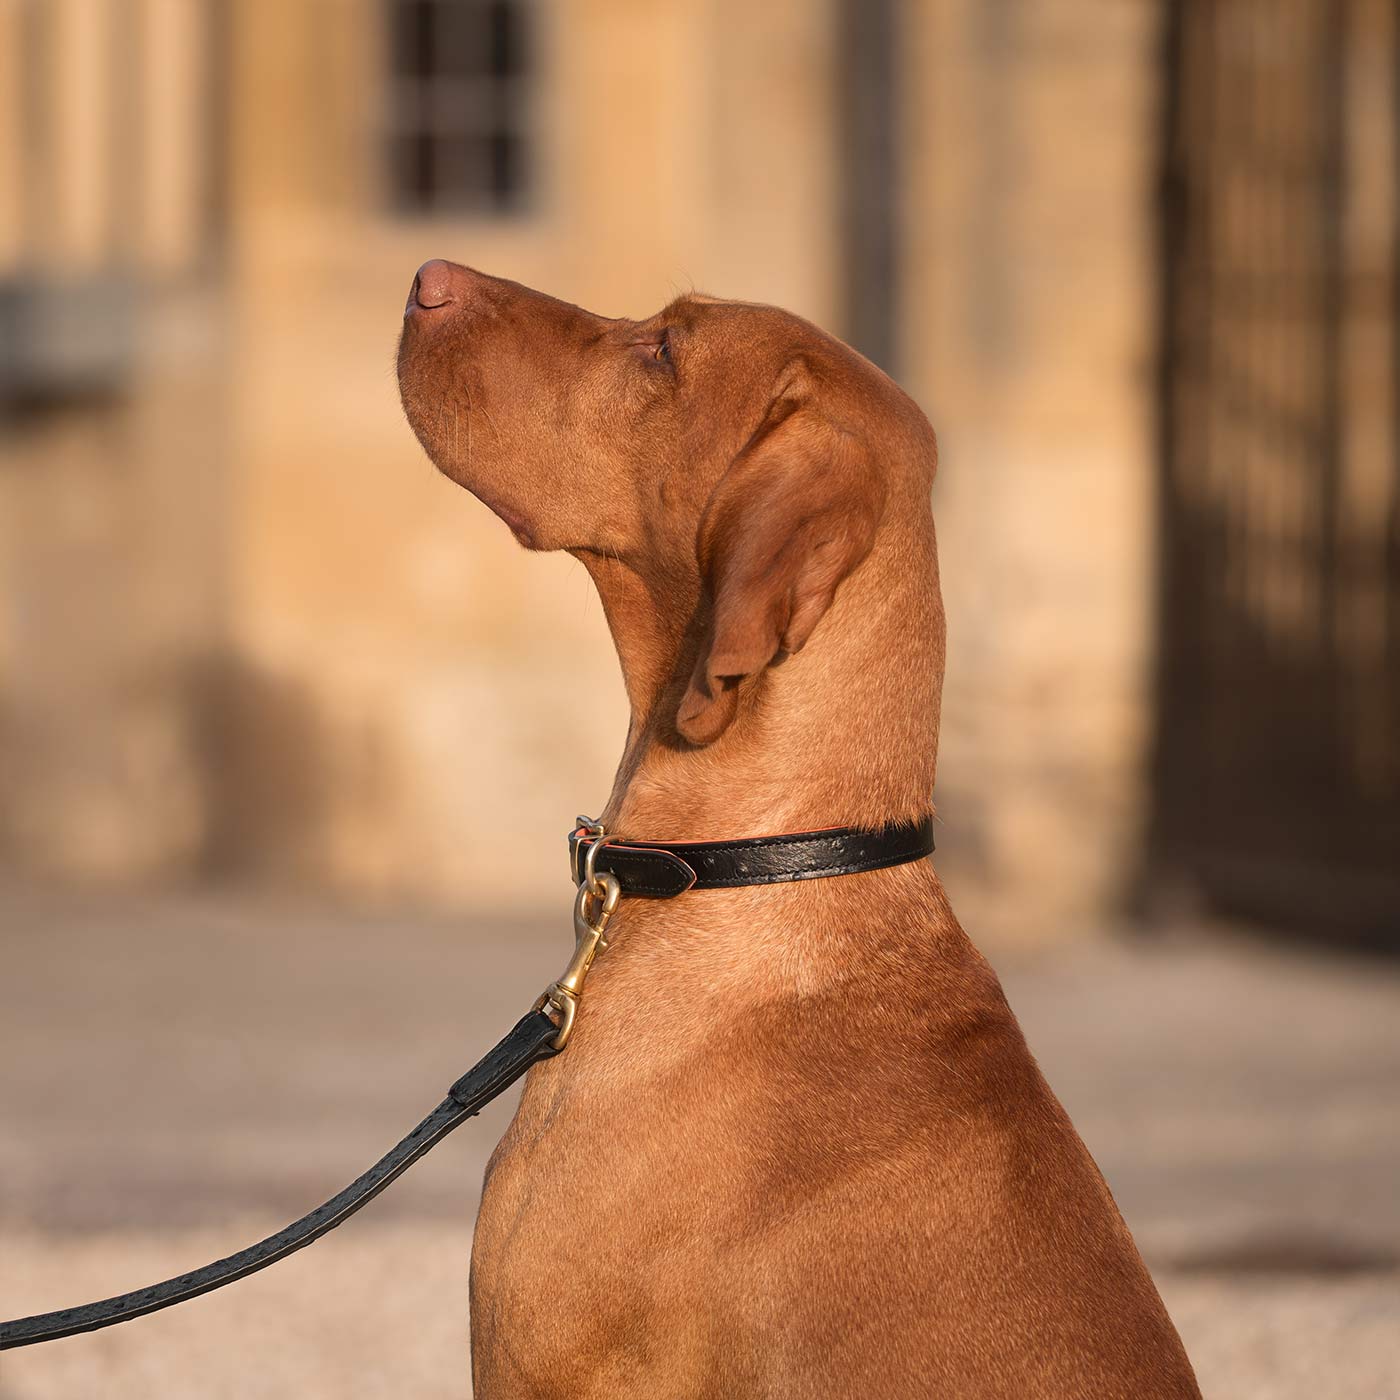 Discover dog walking luxury with our handcrafted Italian Ostrich leather dog Lead in Black & Orange! The perfect Lead for dogs available now at Lords & Labradors